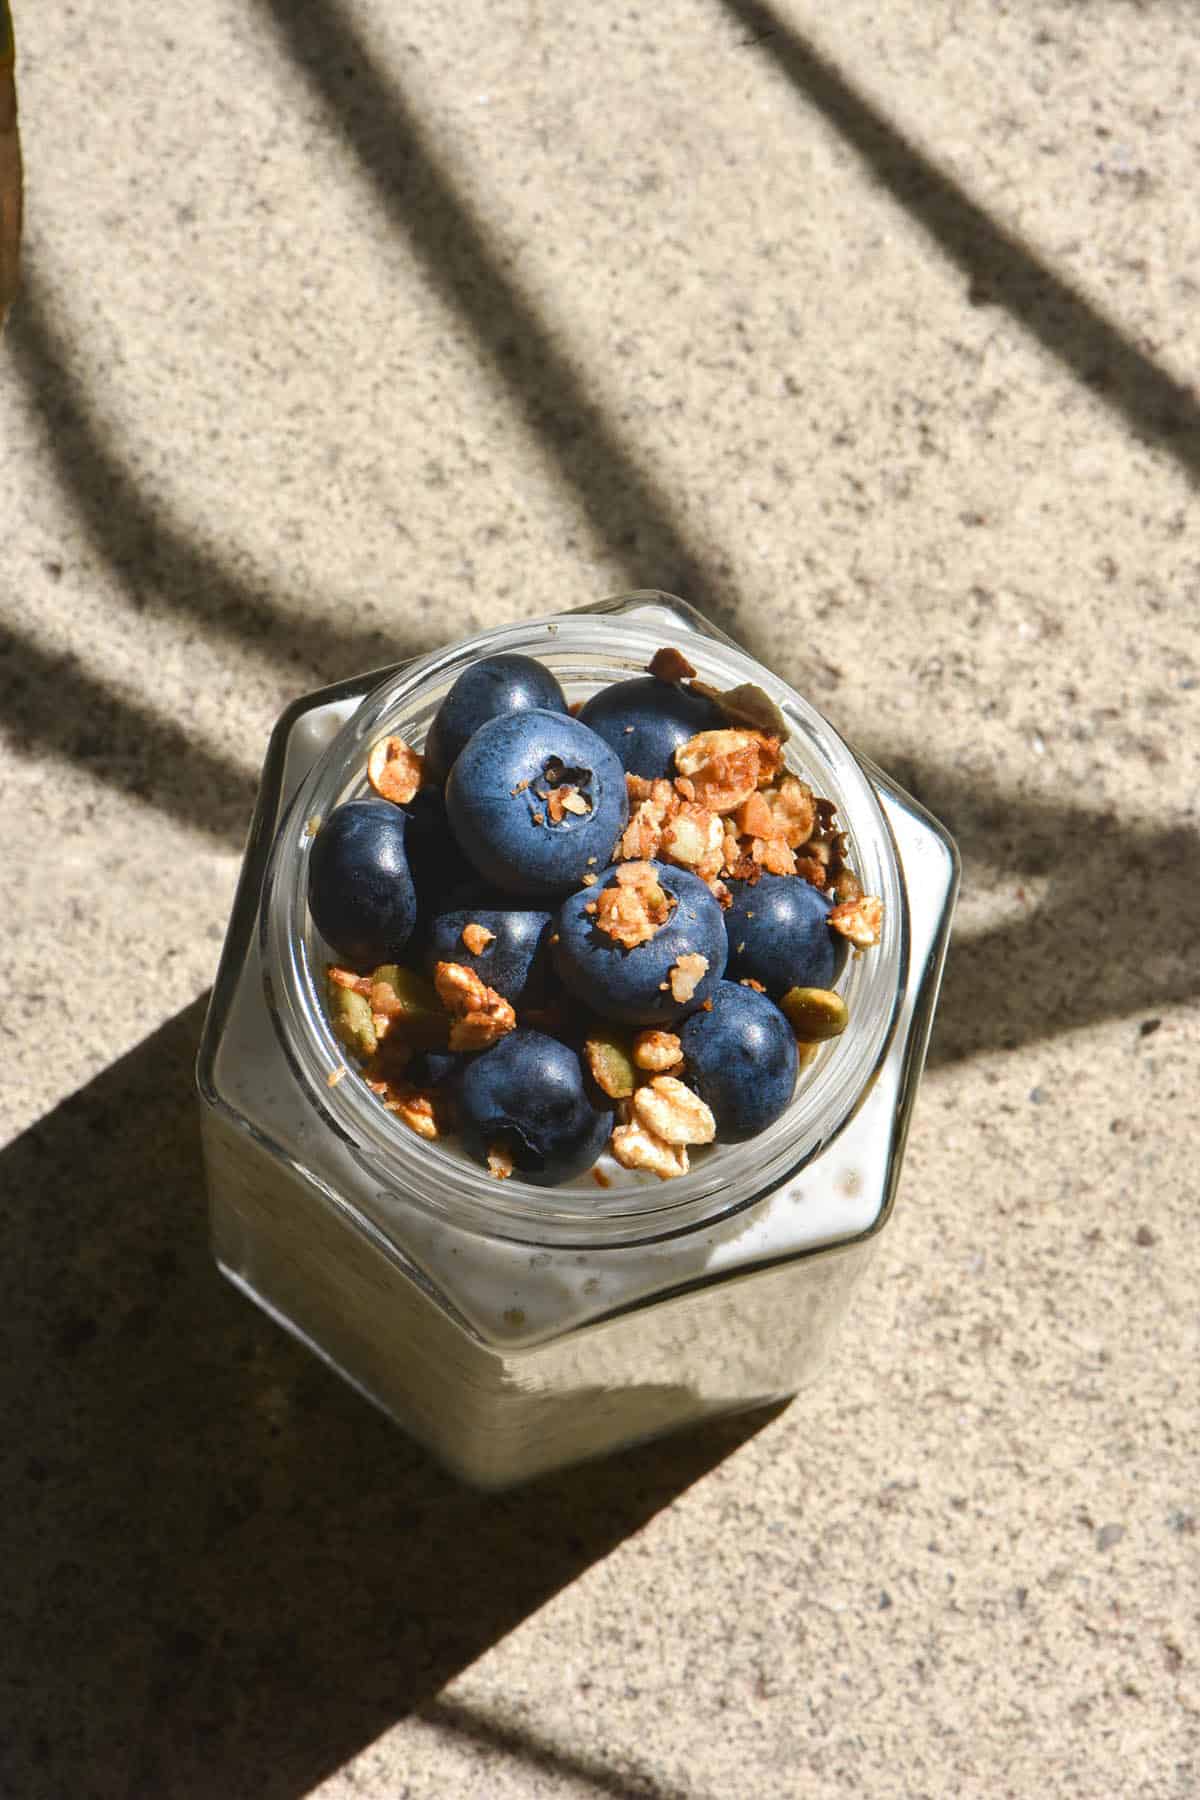 An aerial image of a jar of low FODMAP overnight oats topped with blueberries and extra granola. The jar sits on a stone paver and the contrasting sunlight and shadow cast by a plant in the background creates a unique shadow pattern across the image